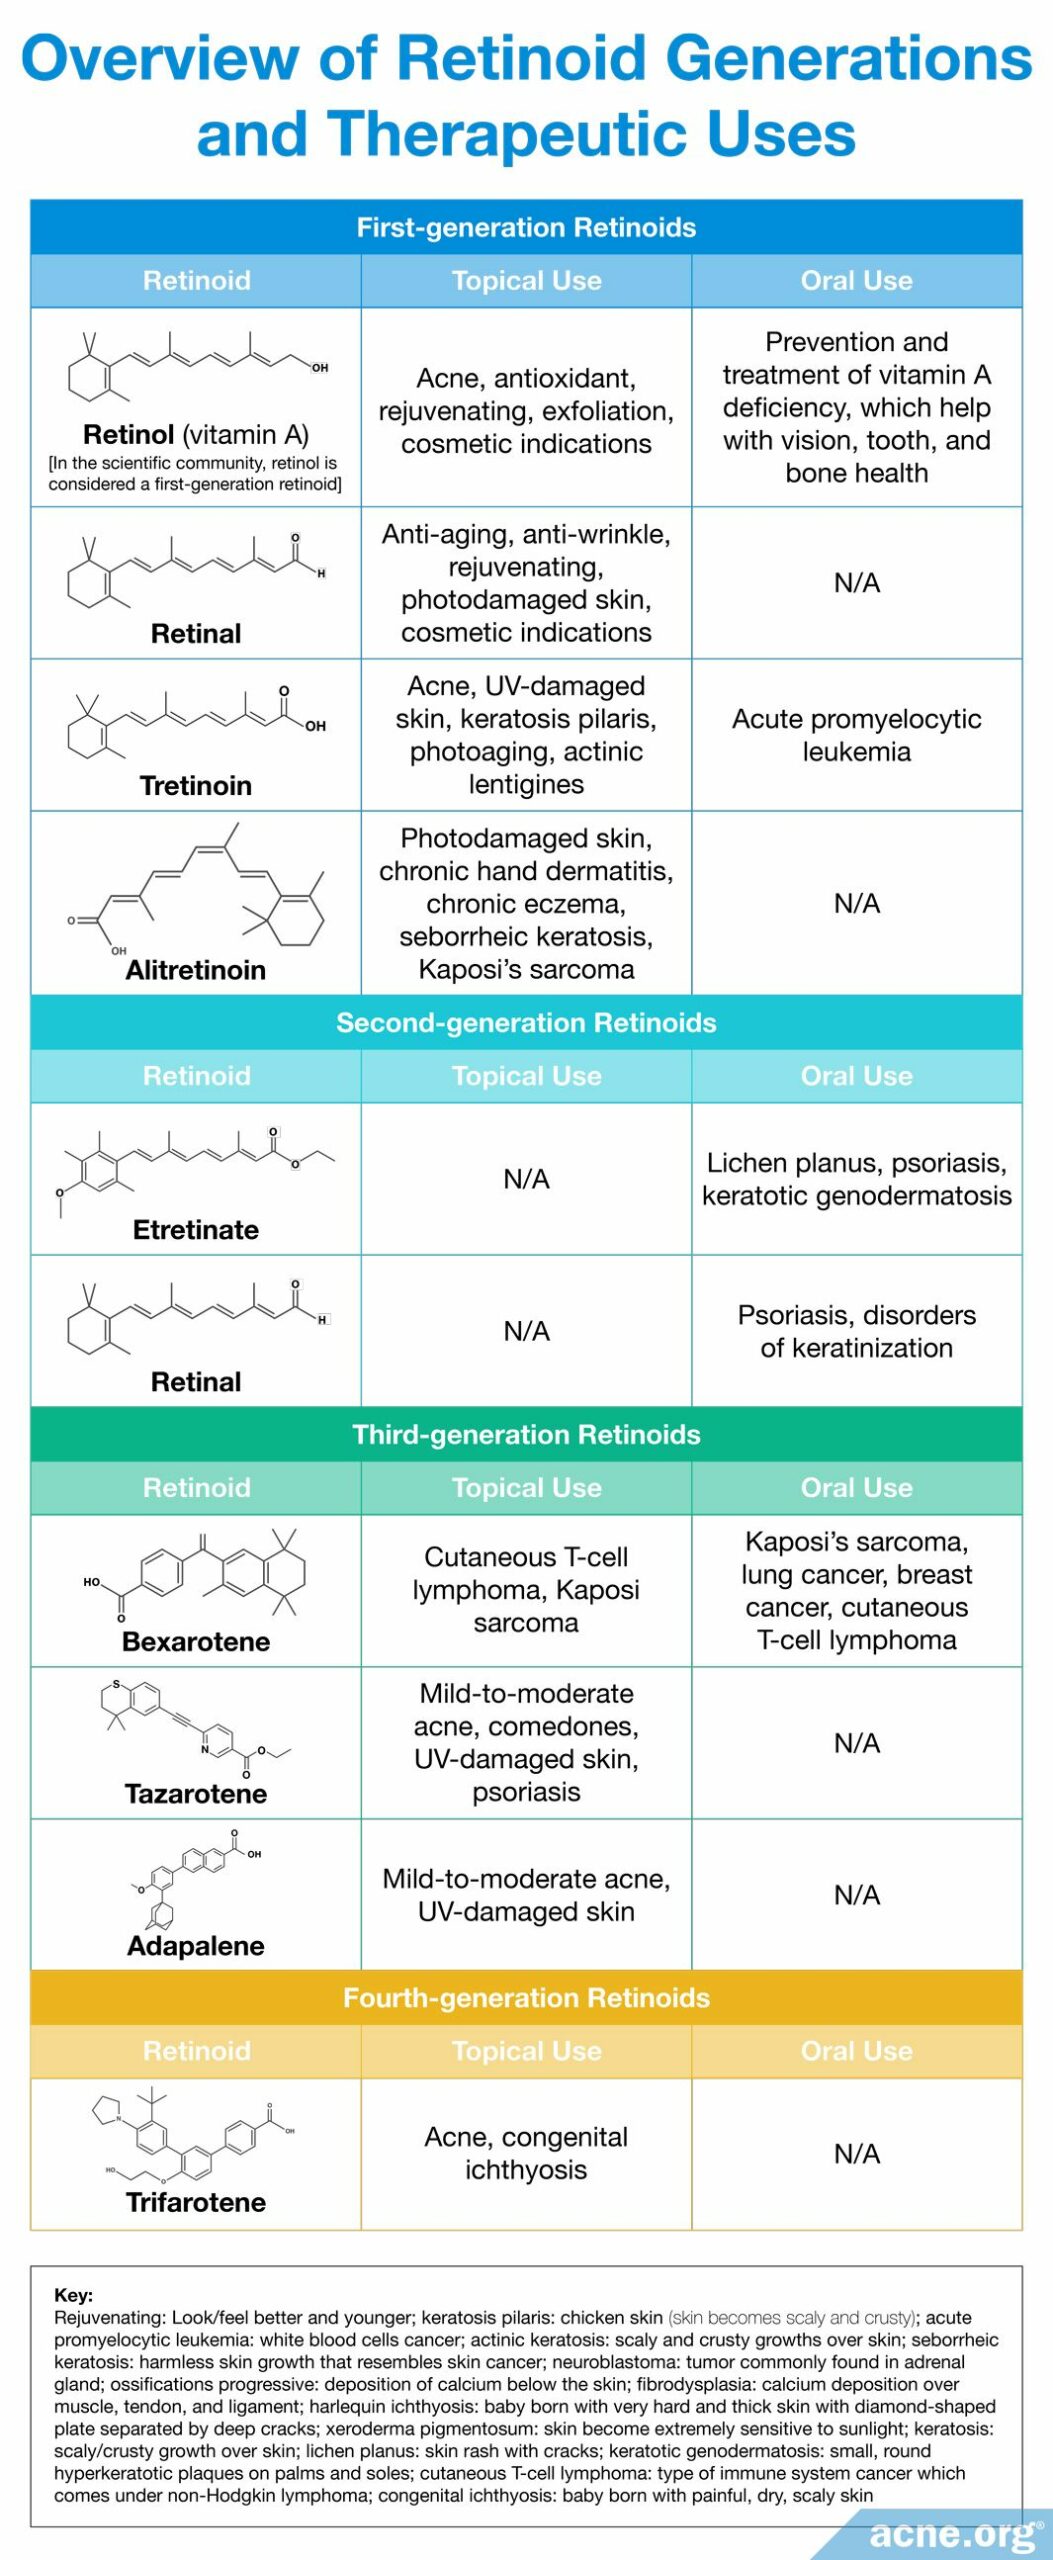 Overview of Retinoid Generations and Therapeutic Uses